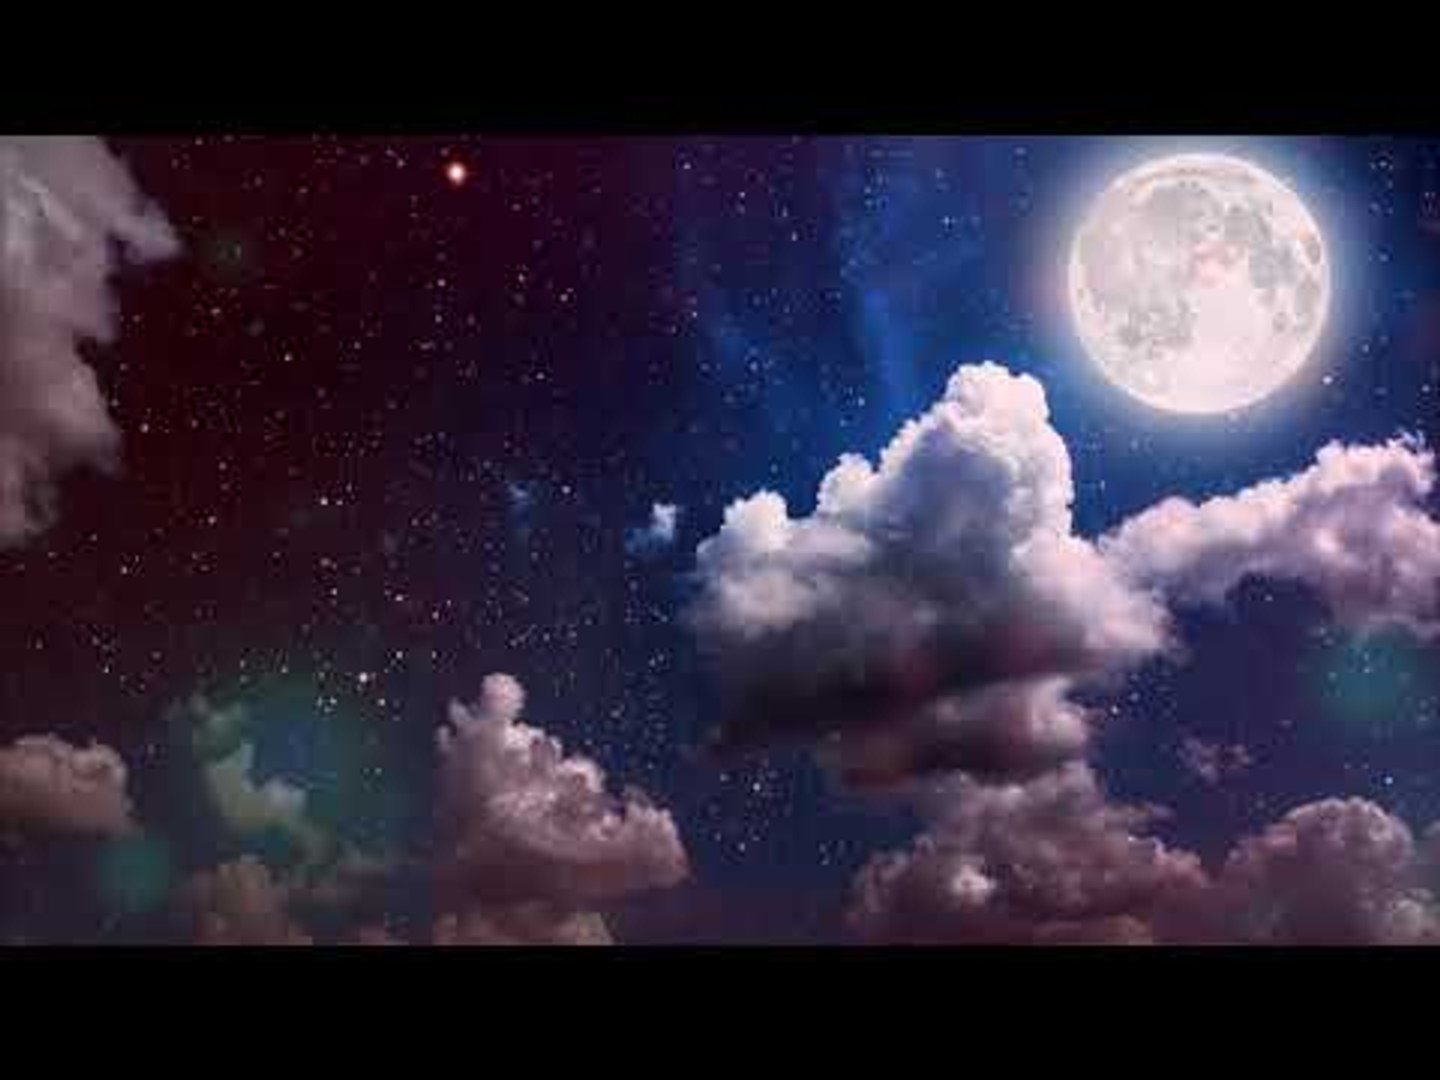 Positive Music - Relaxing Electronic Music, Meditation Inner Peace Music, Healing Music